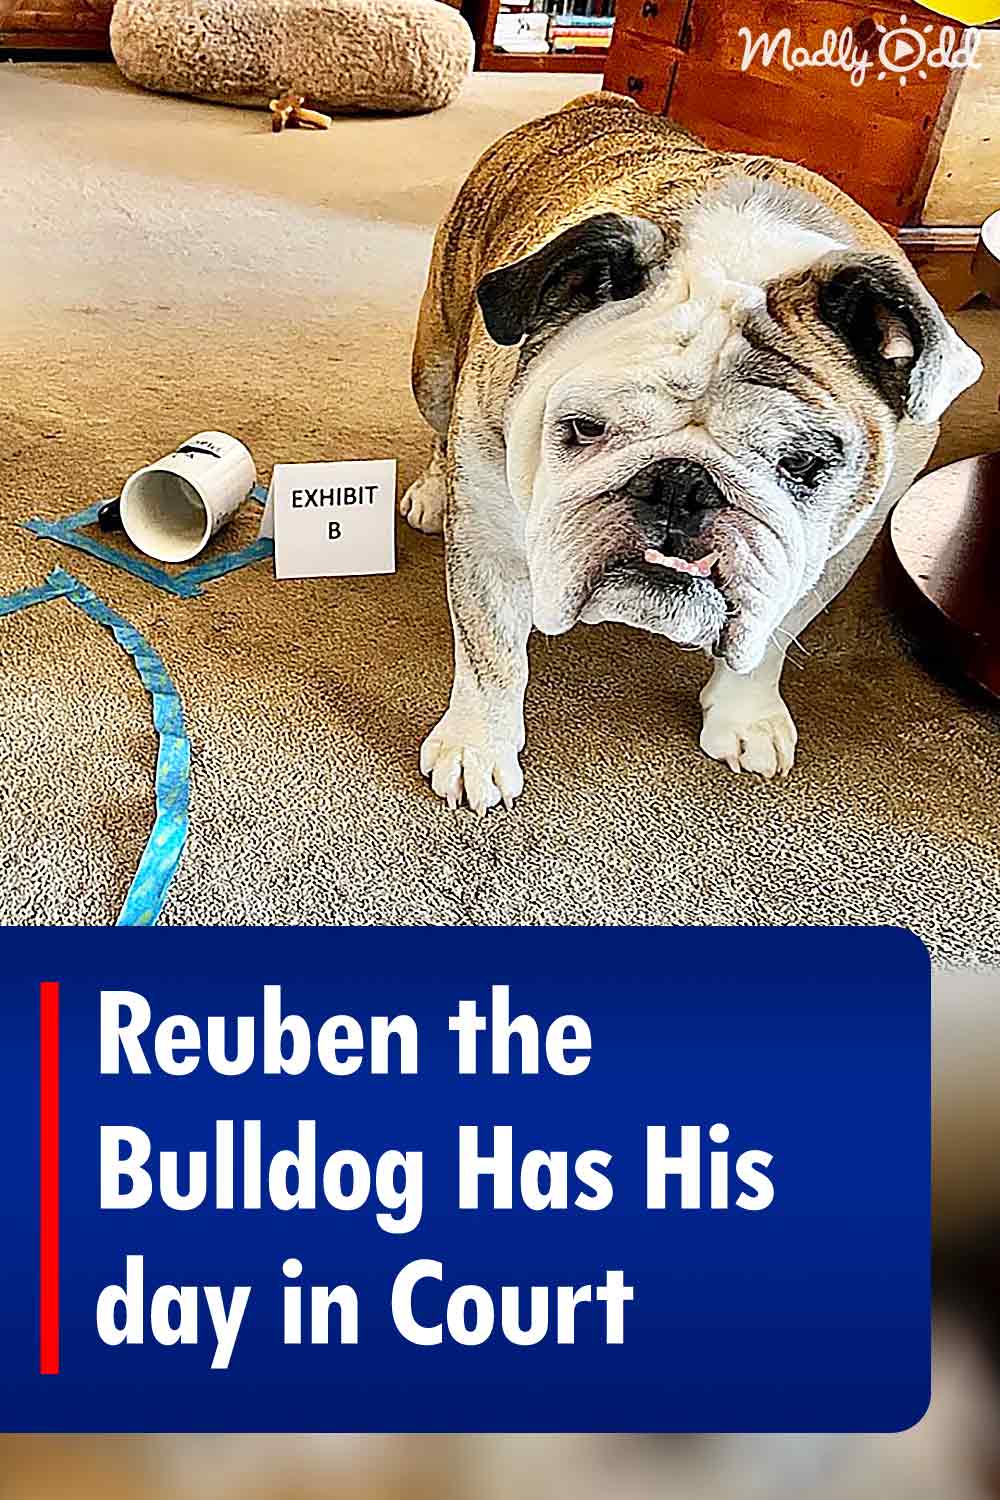 Reuben the Bulldog Has His day in Court